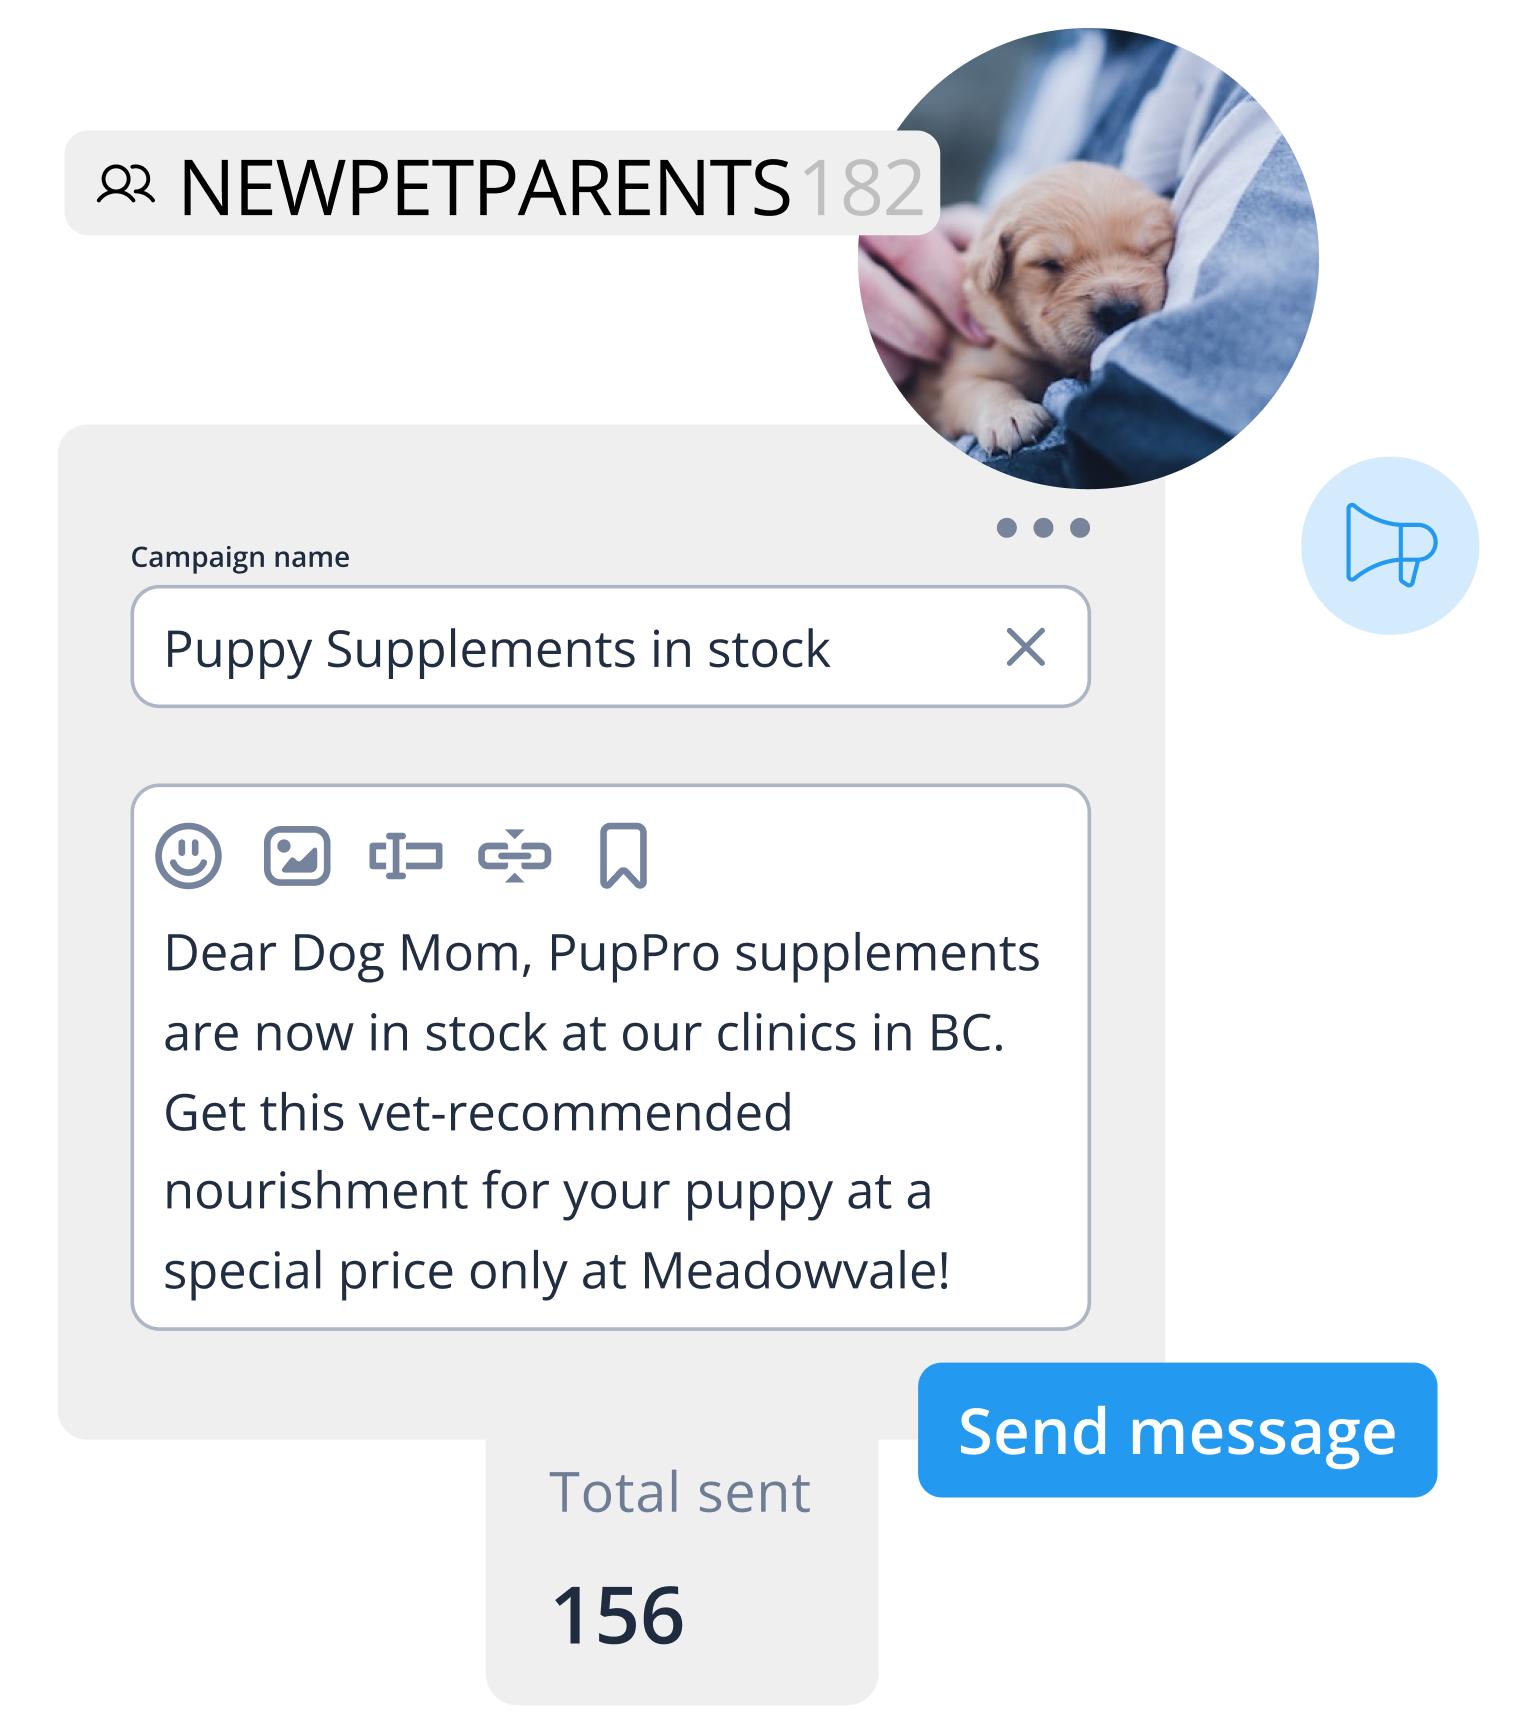 Personalize your pet care communications